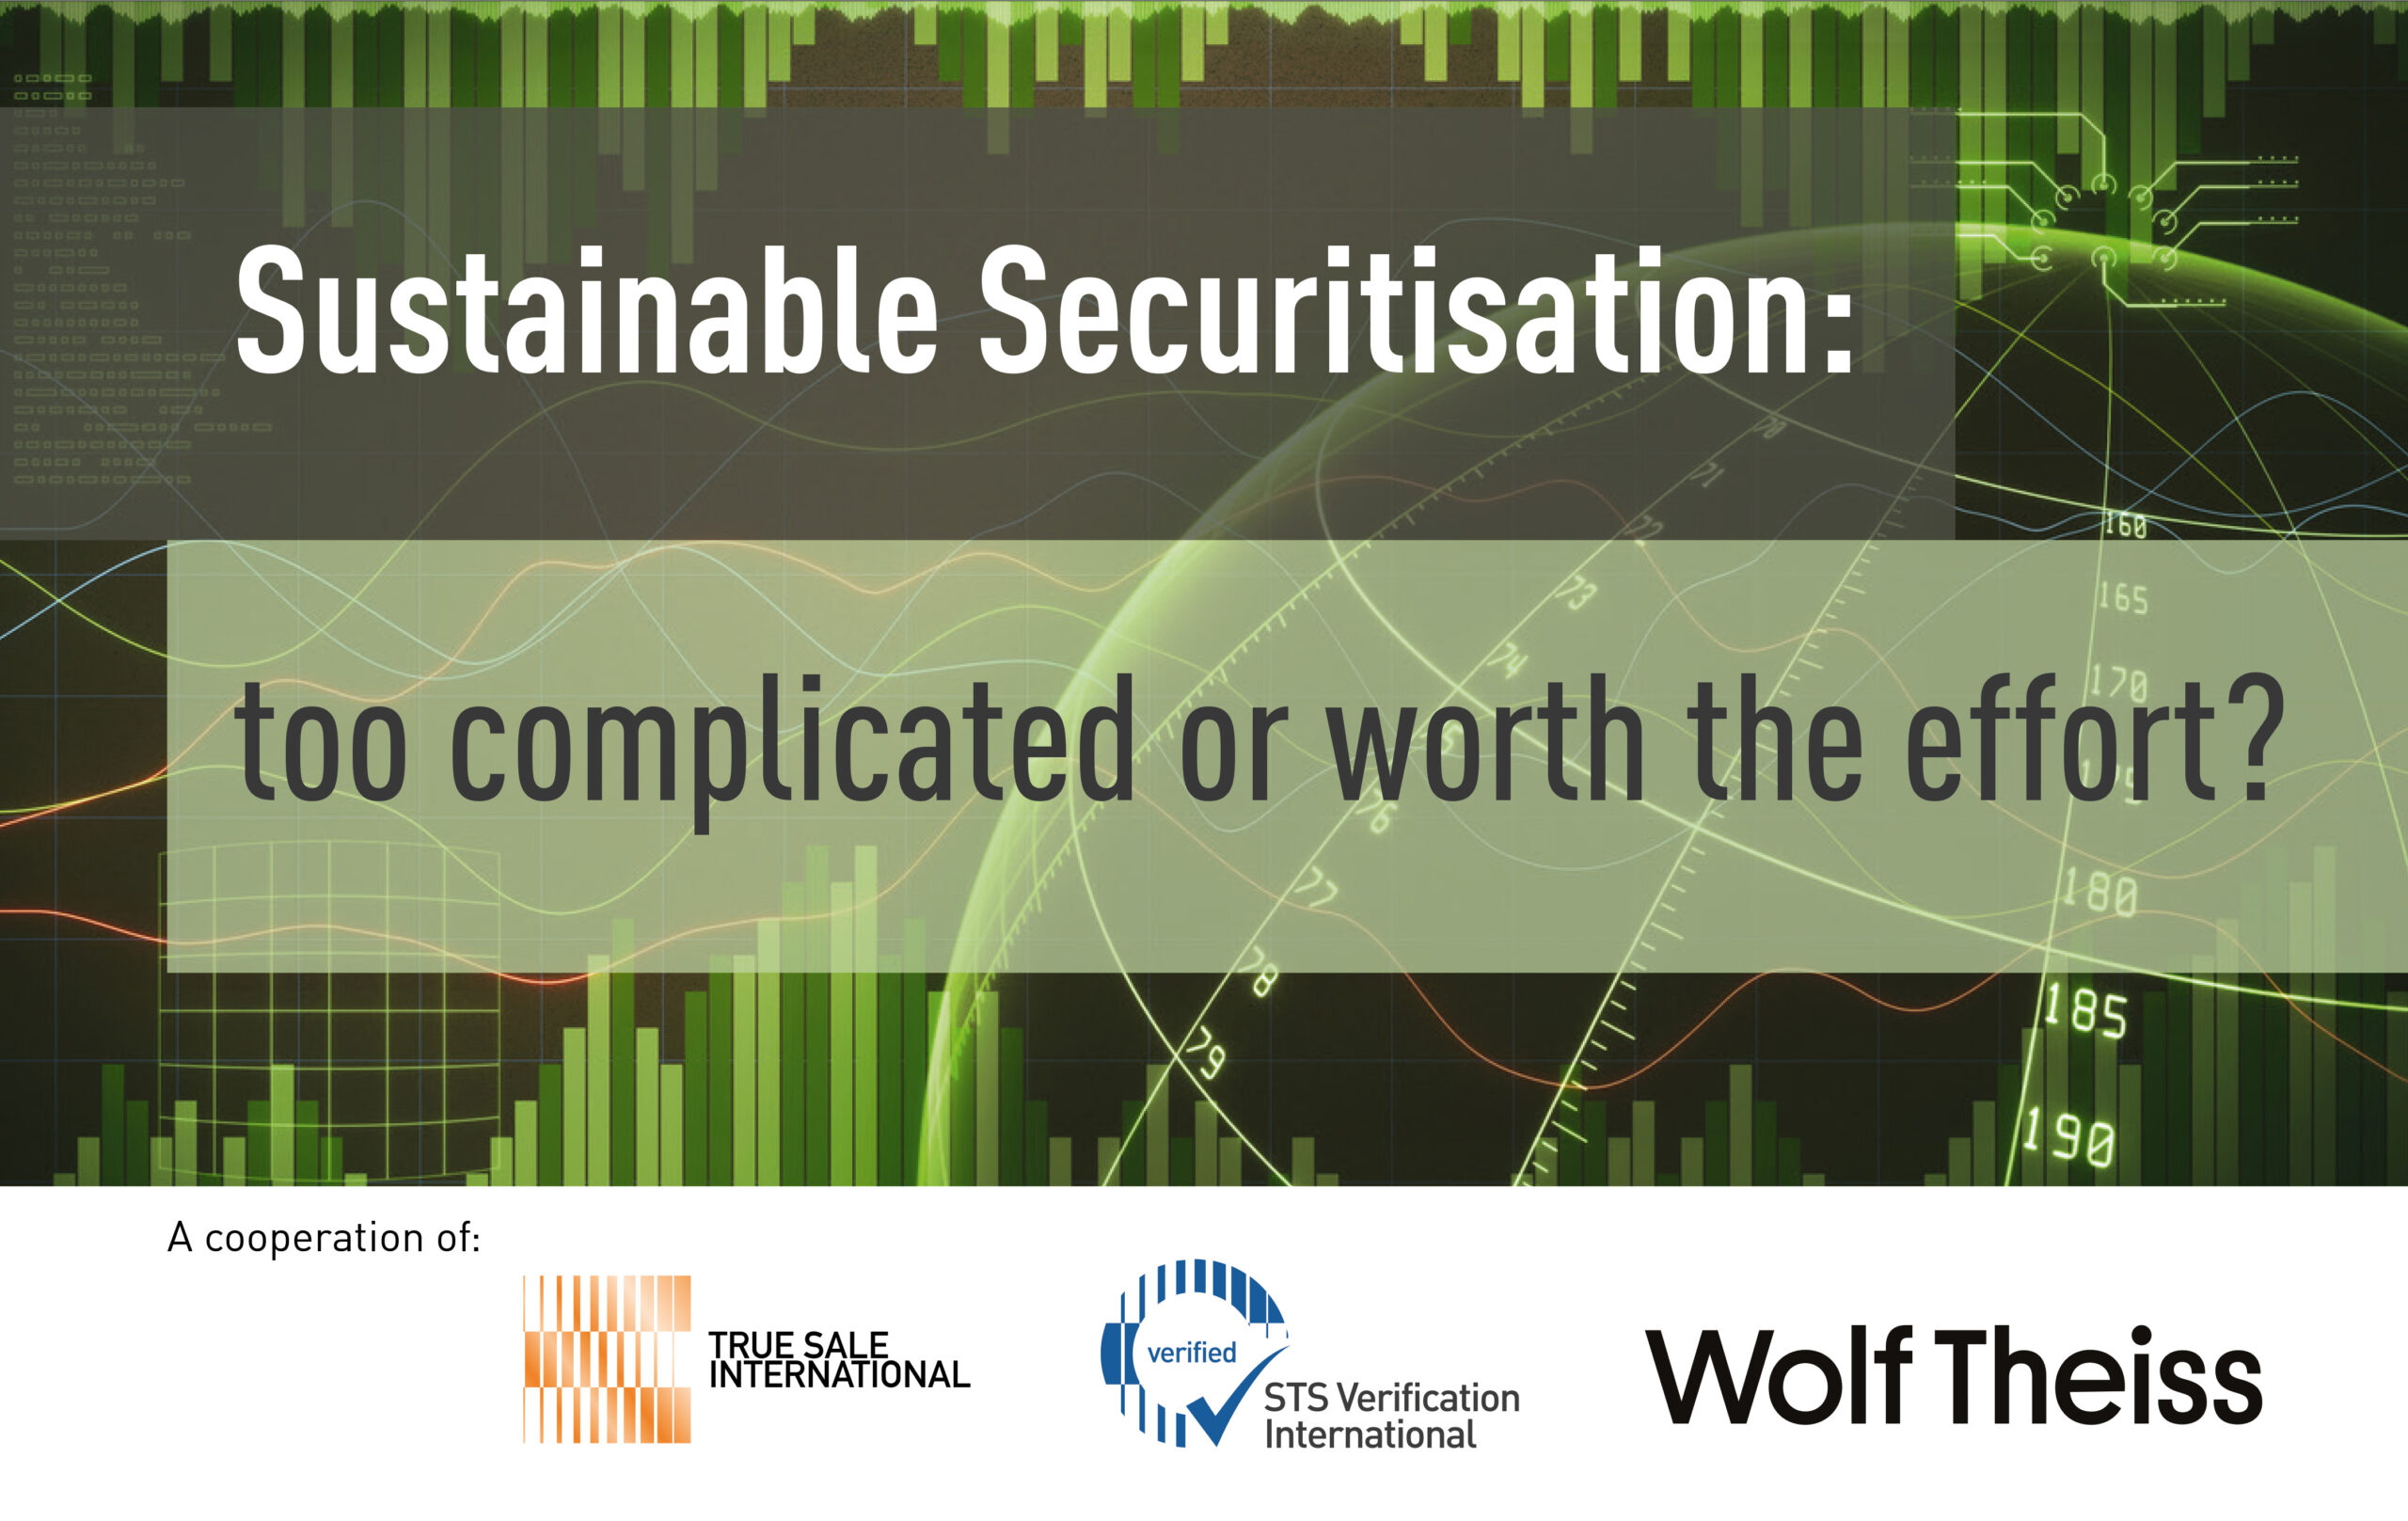 Sustainable Securitisation – too complicated or worth the effort?